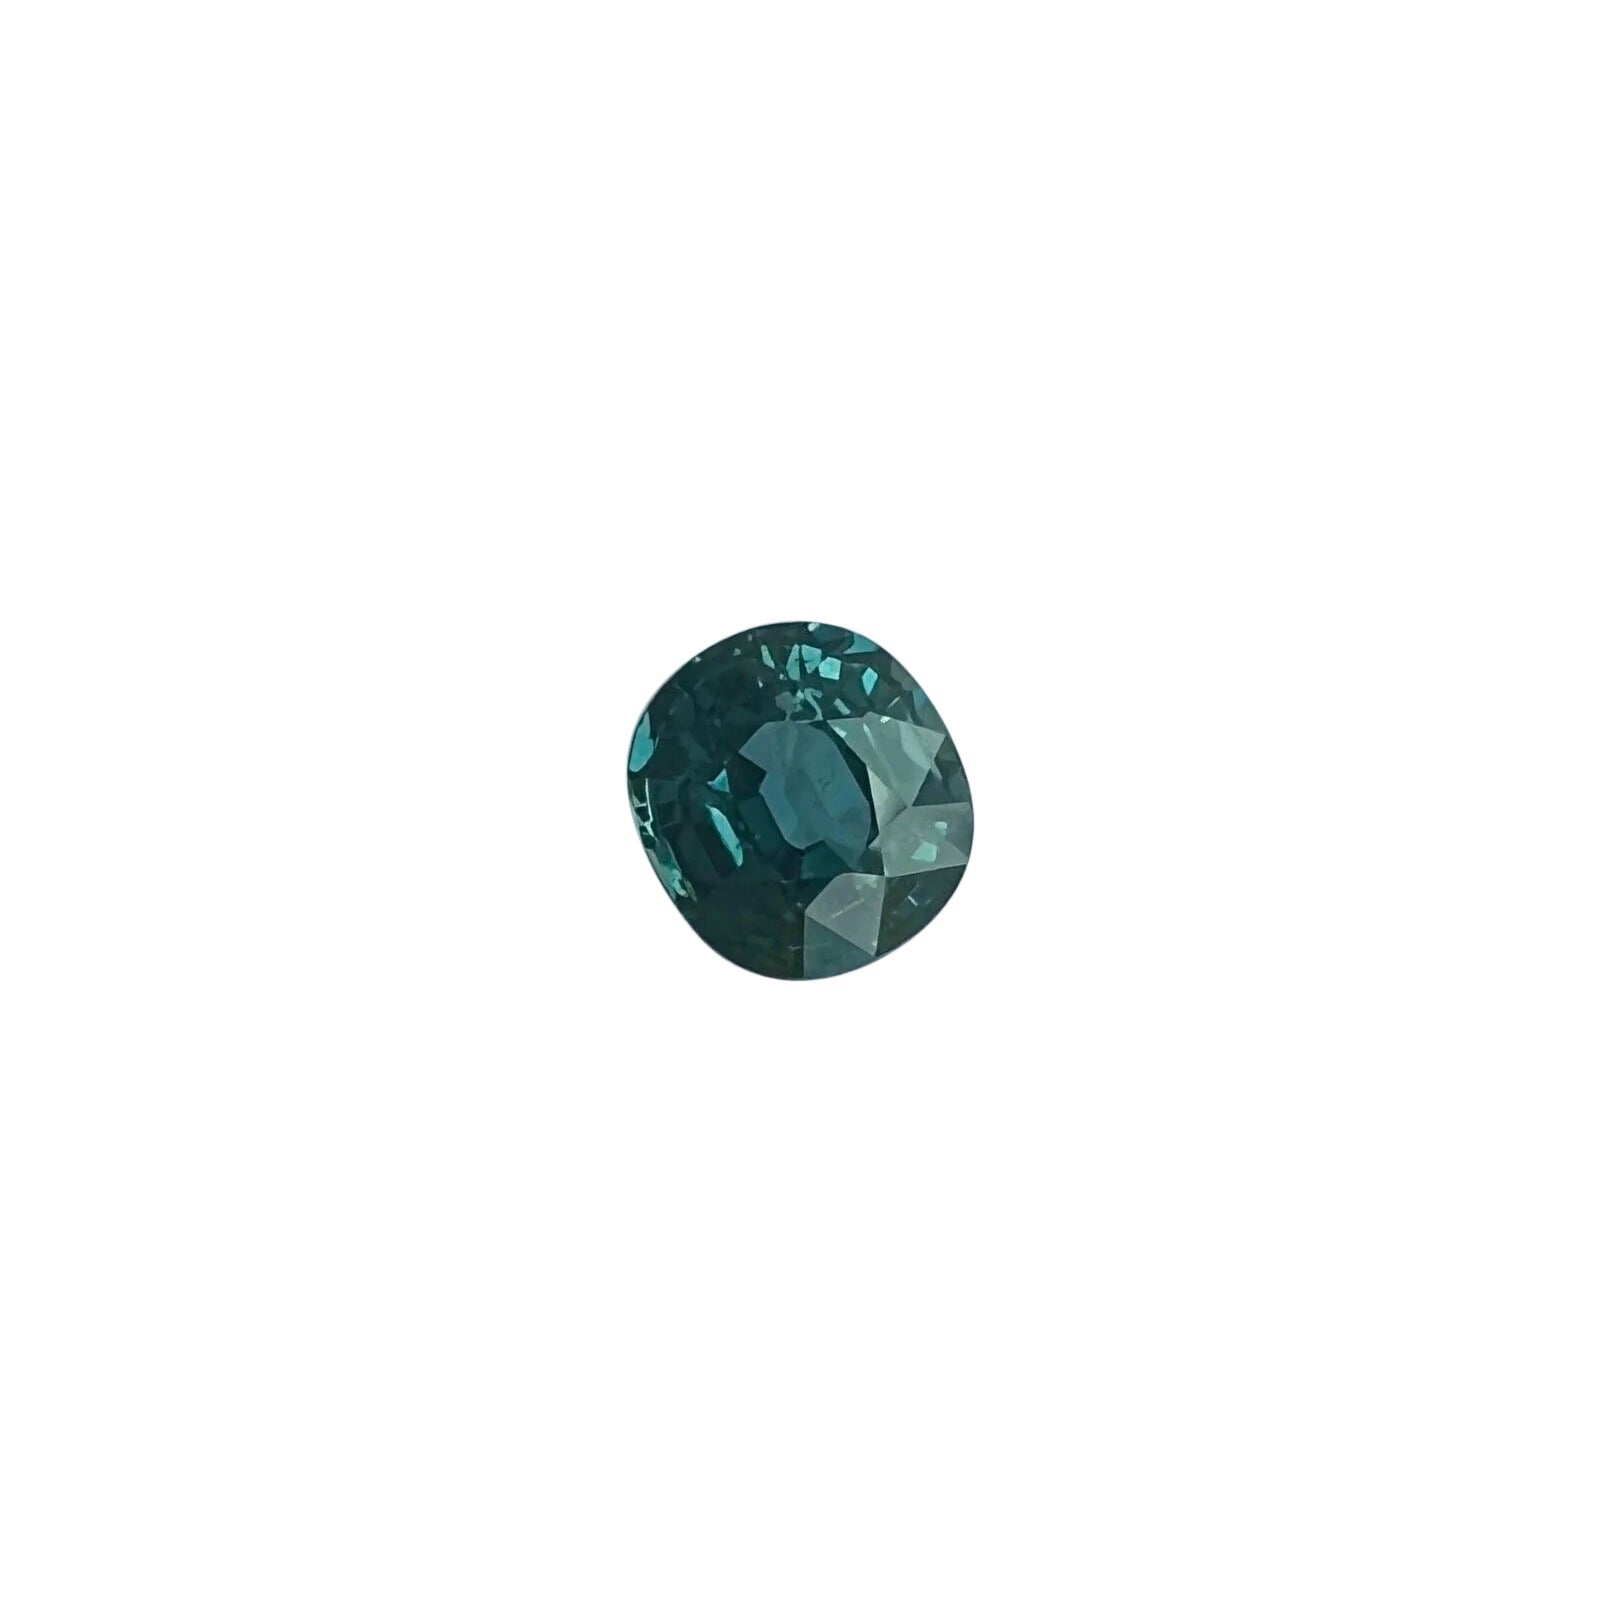 1.03ct Color Change Sapphire Rare Green Blue Untreated Oval Cut IGI Certified For Sale